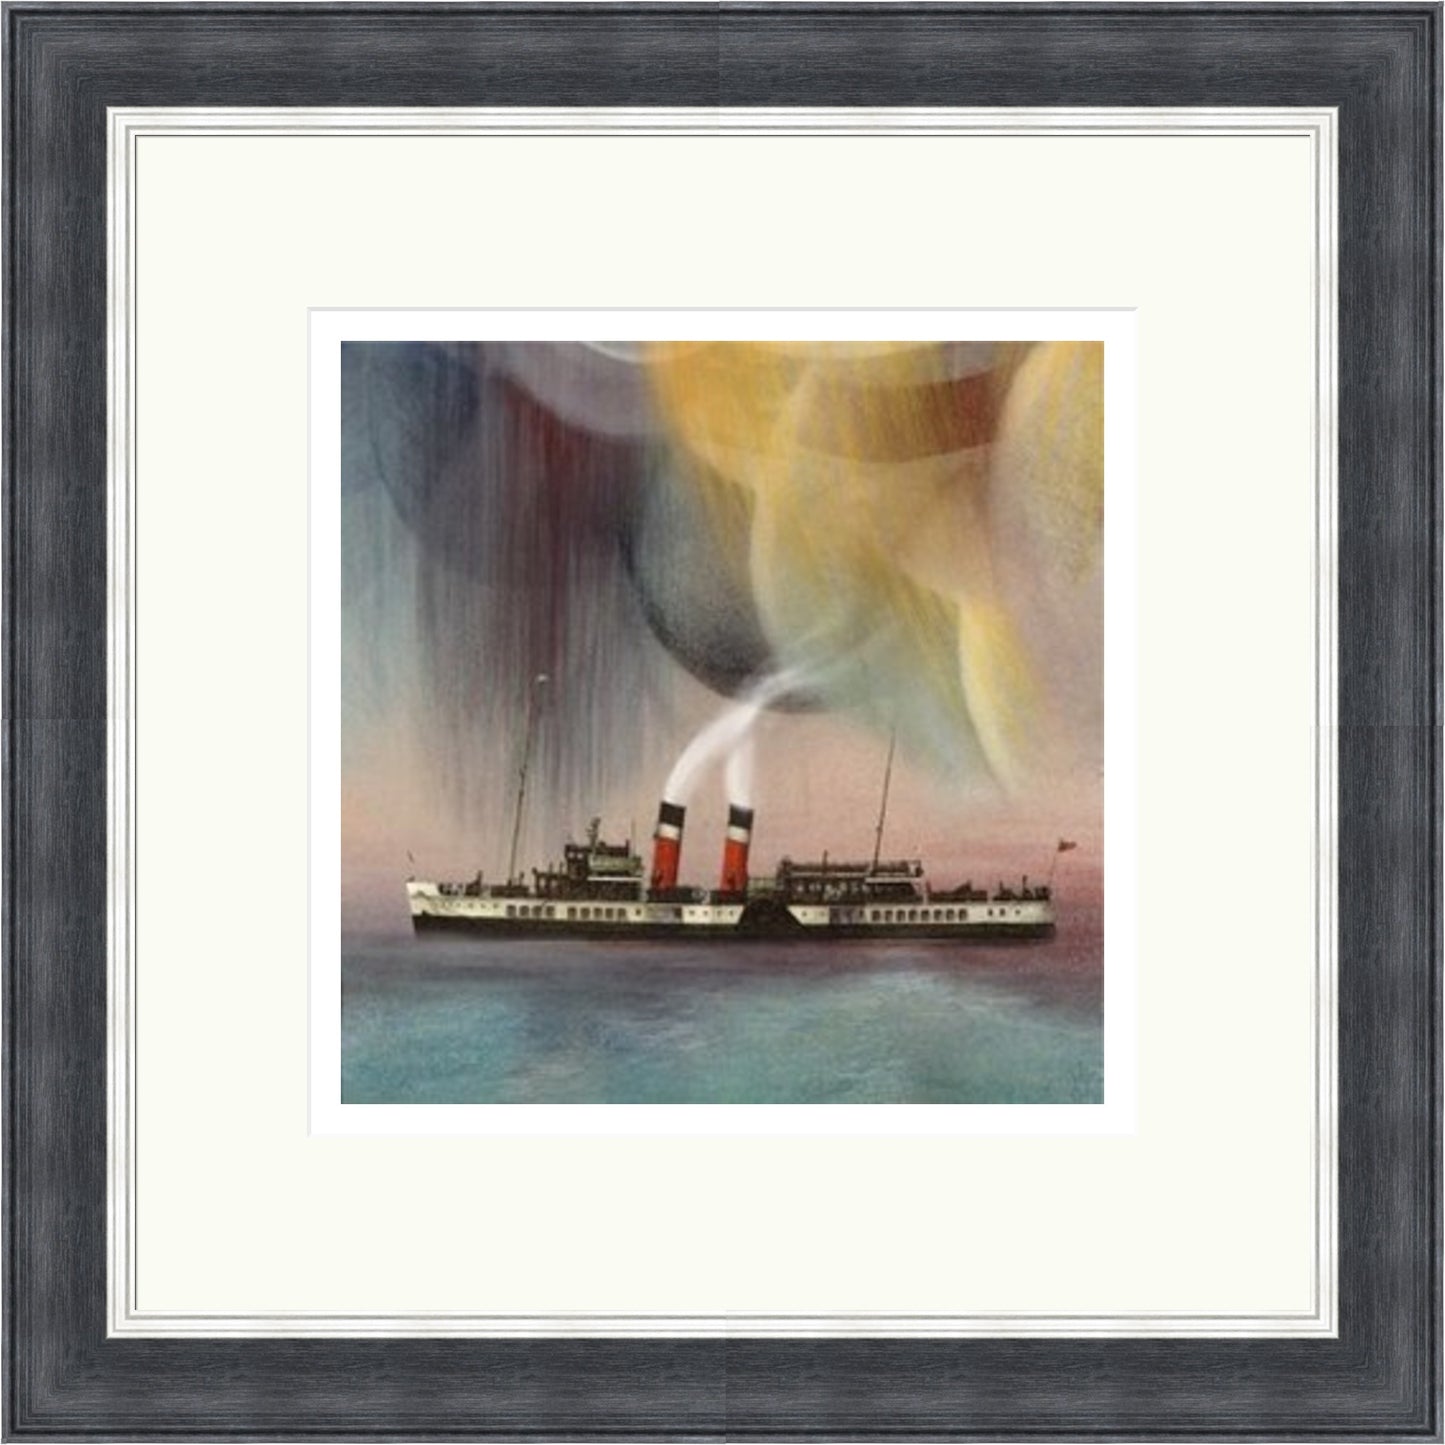 PS Waverley by Esther Cohen